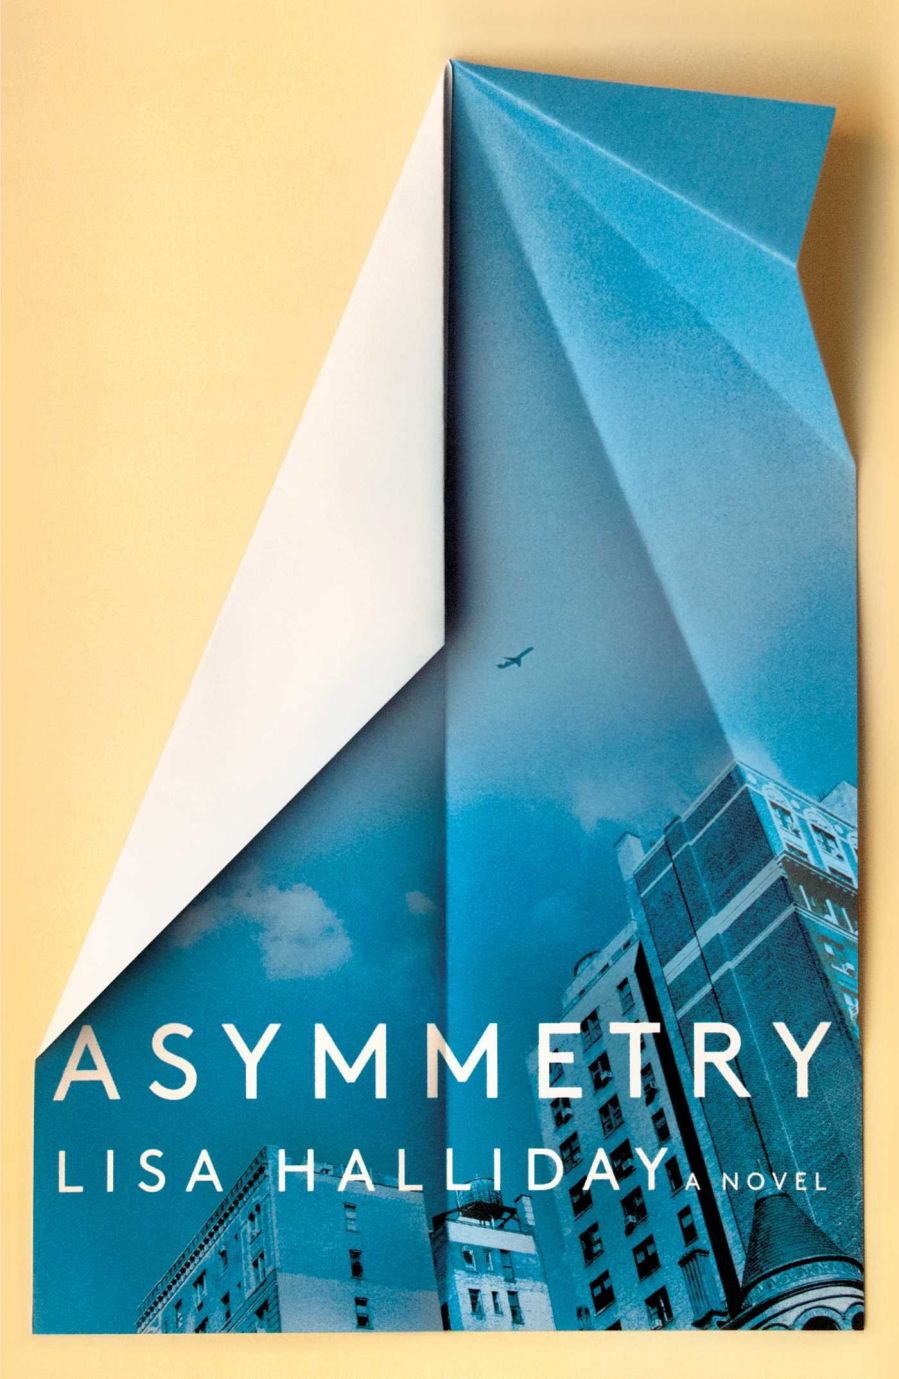 Book cover: Asymmetry, by Lisa Halliday.